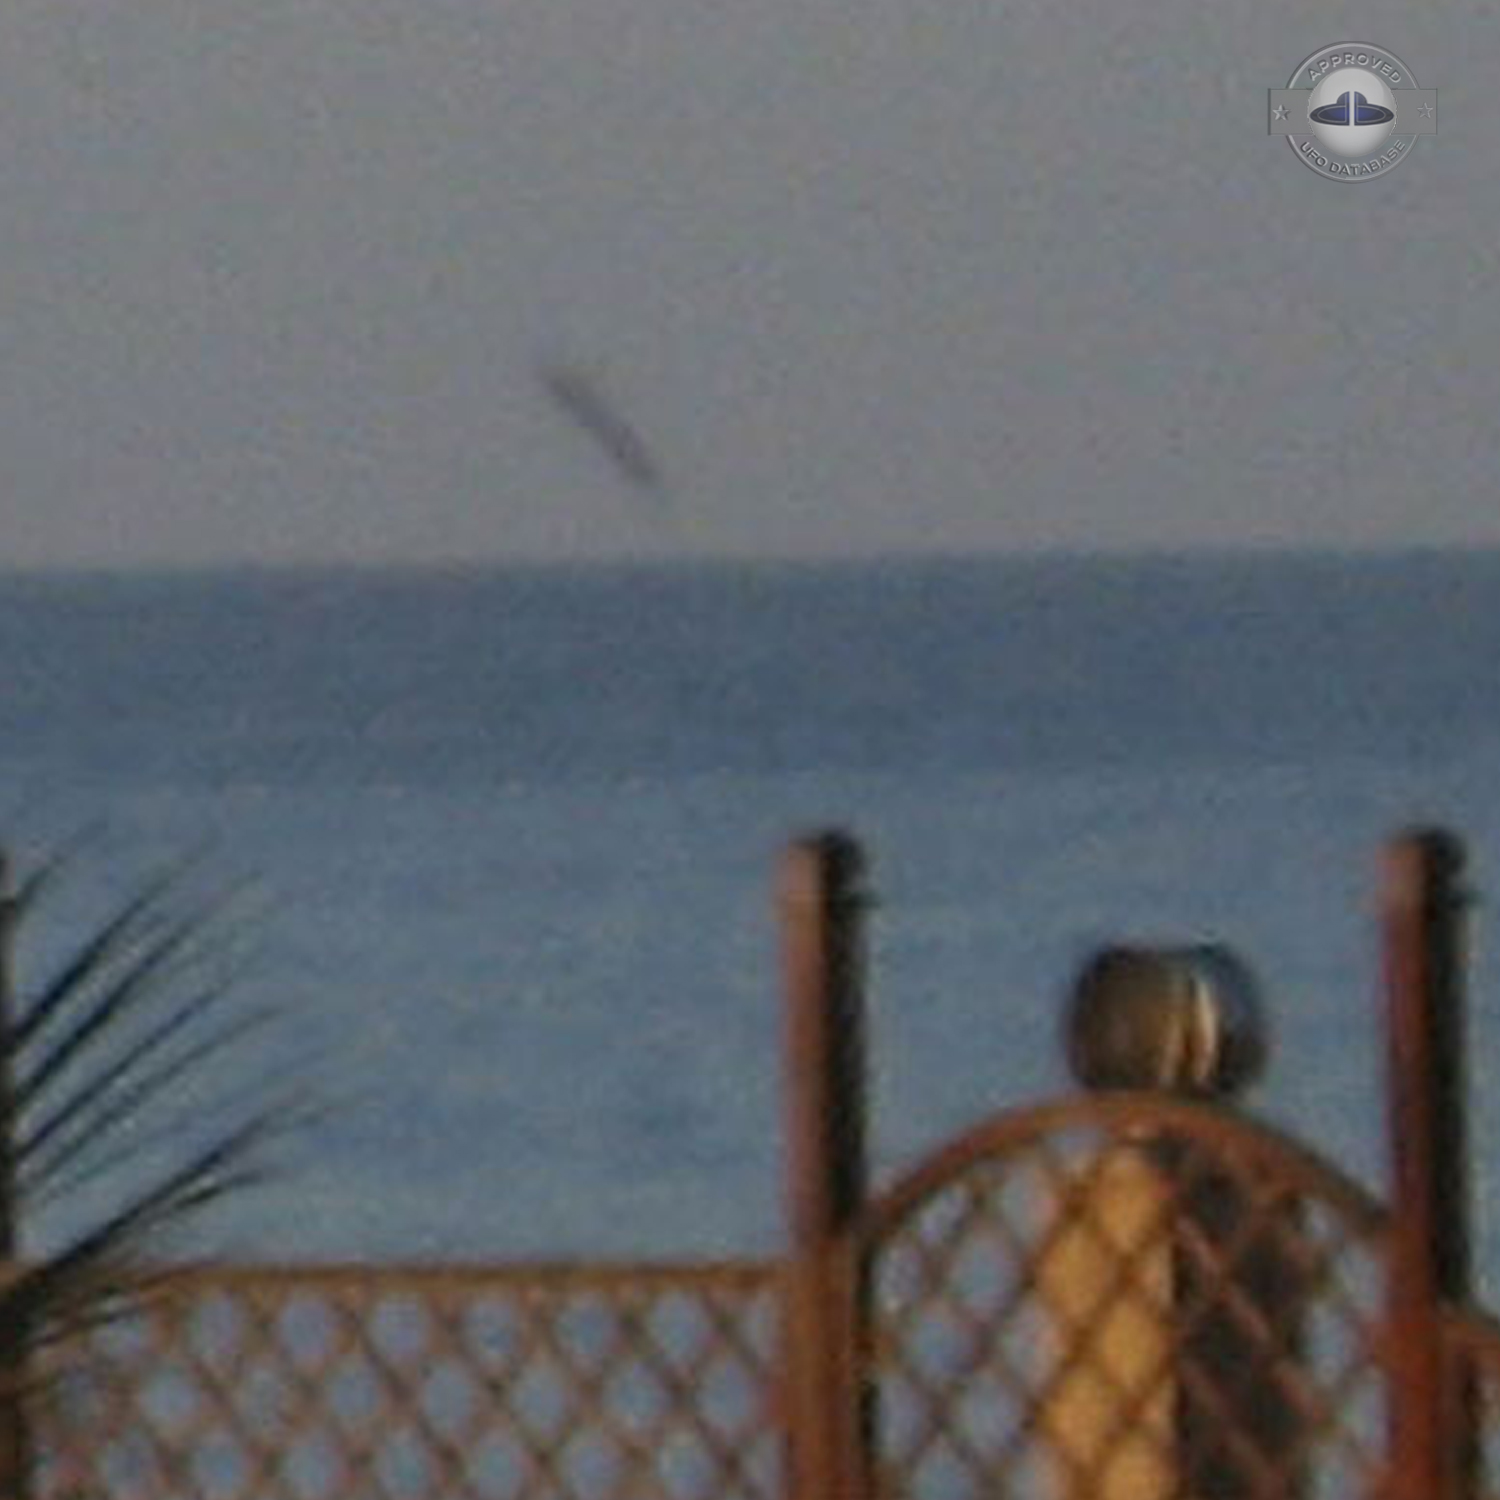 Proof of UFO diving under the Sea Canary island Fuerteventura | 2011 UFO Picture #235-3